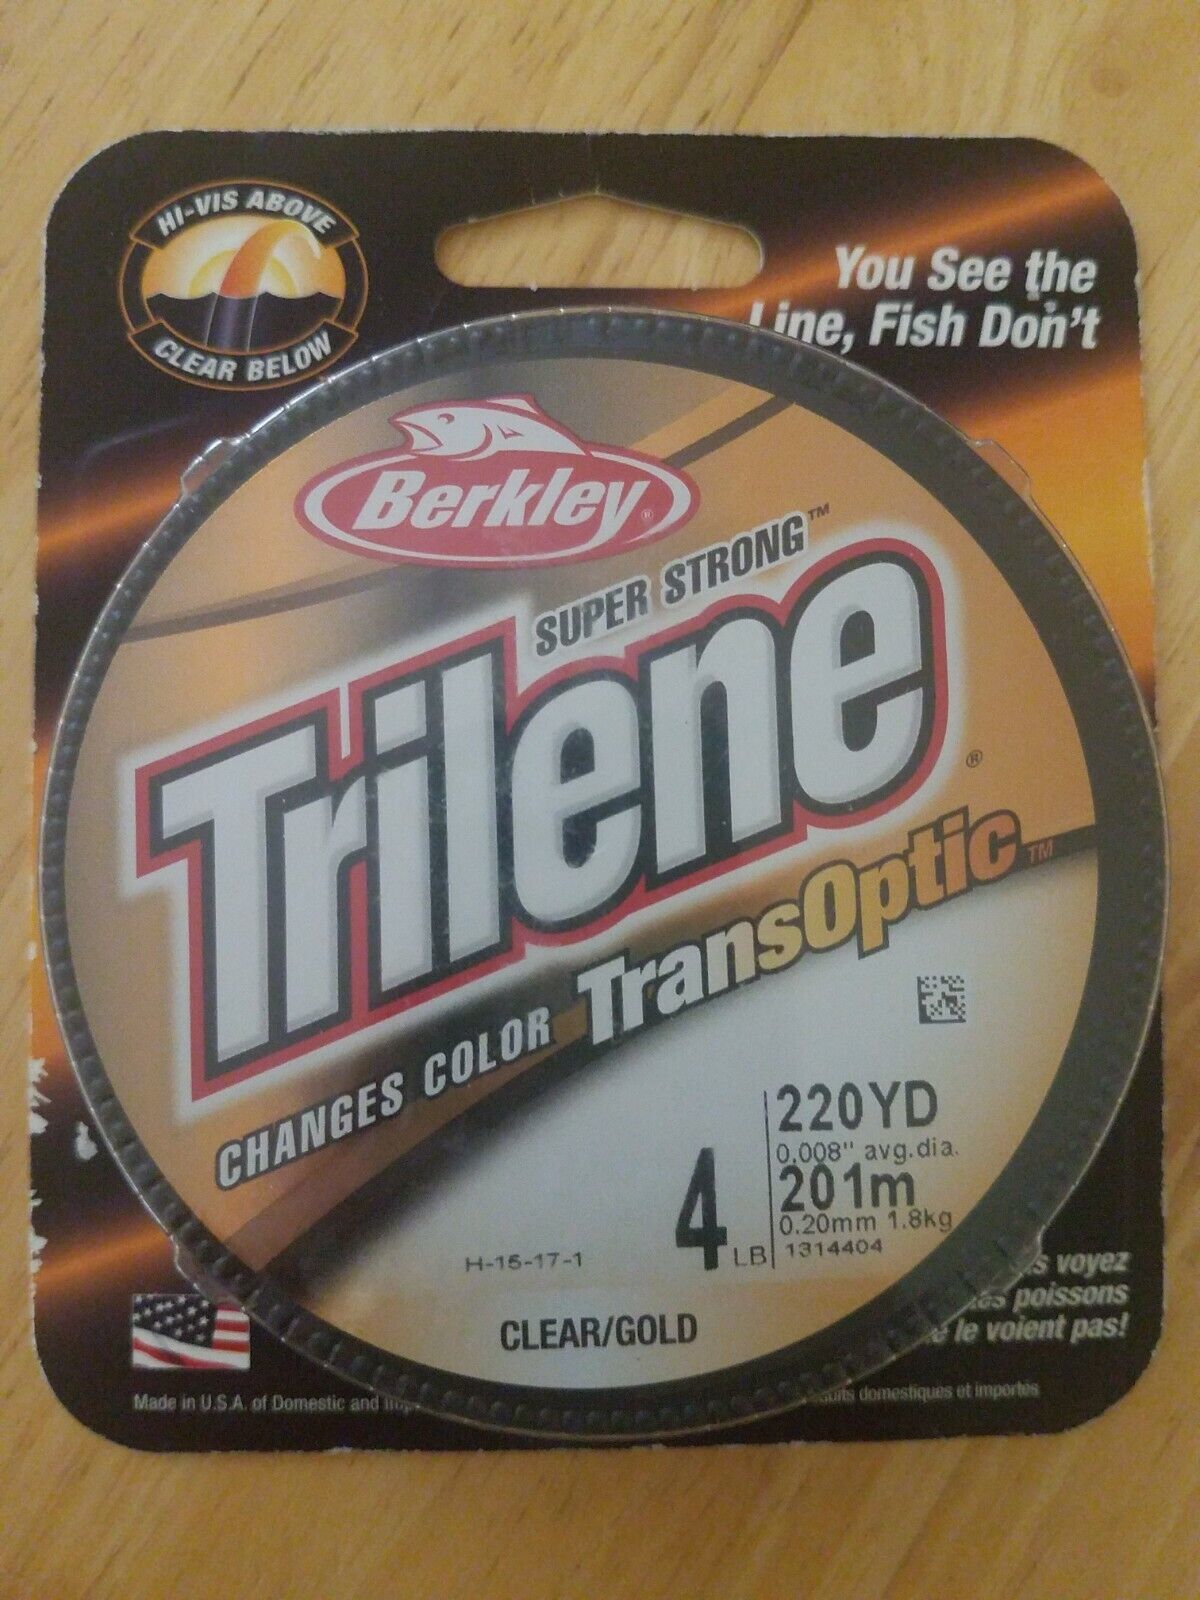 Trilene Transoptic Changes Color 4lb 220 Yd and 50 similar items